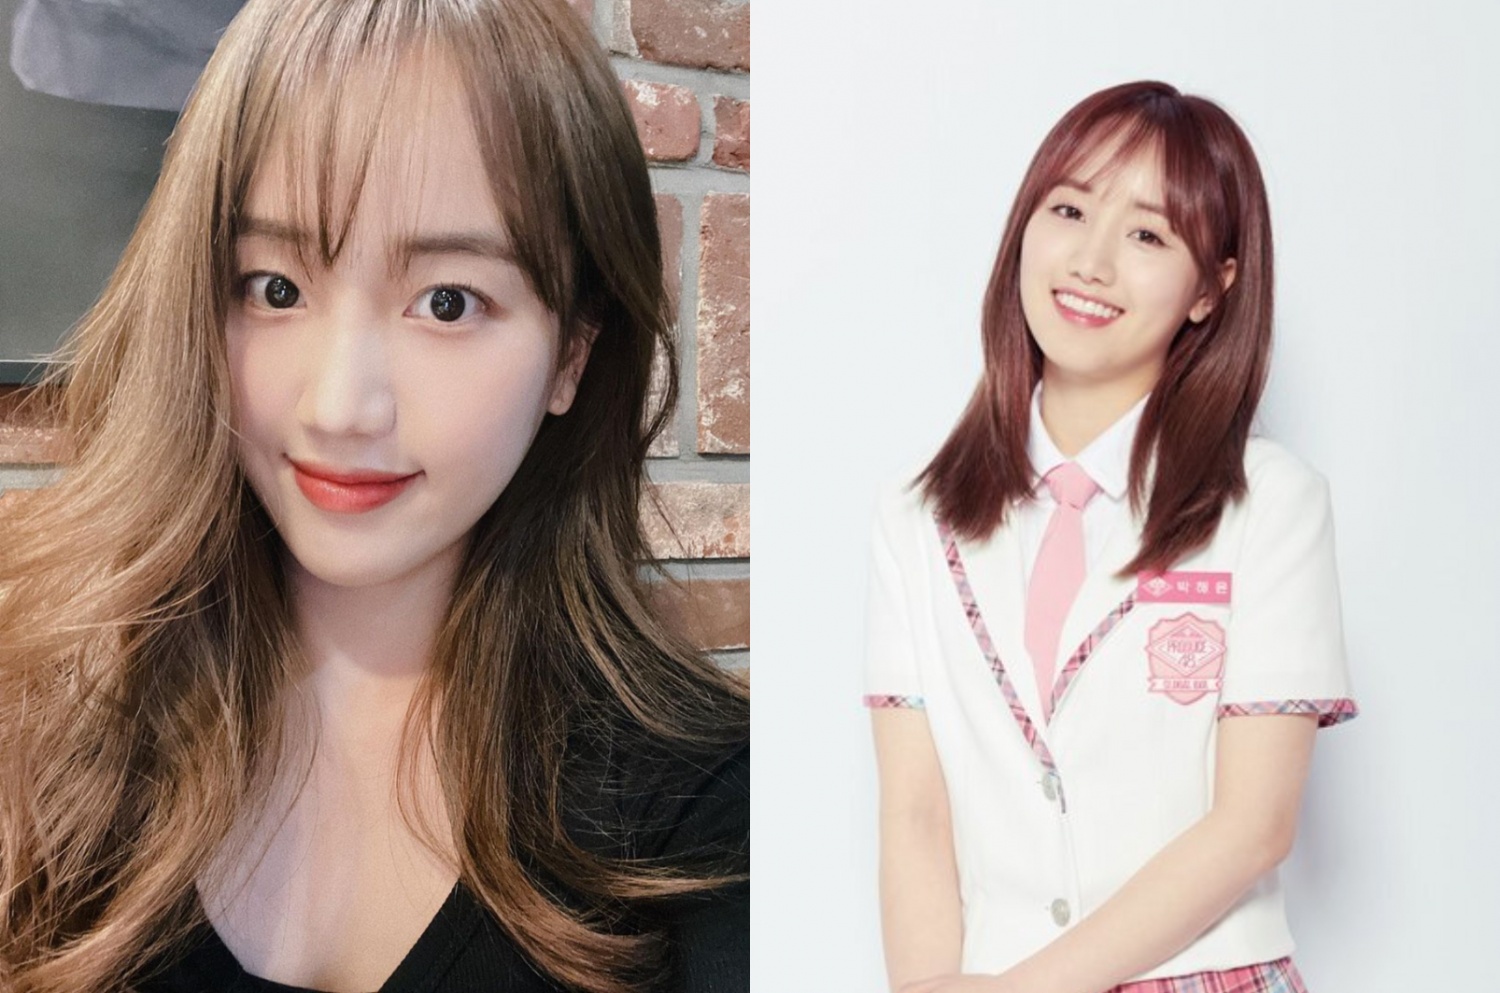 Where is Park Haeyoon now?  “Produce 48” trainee status, ranked 19th